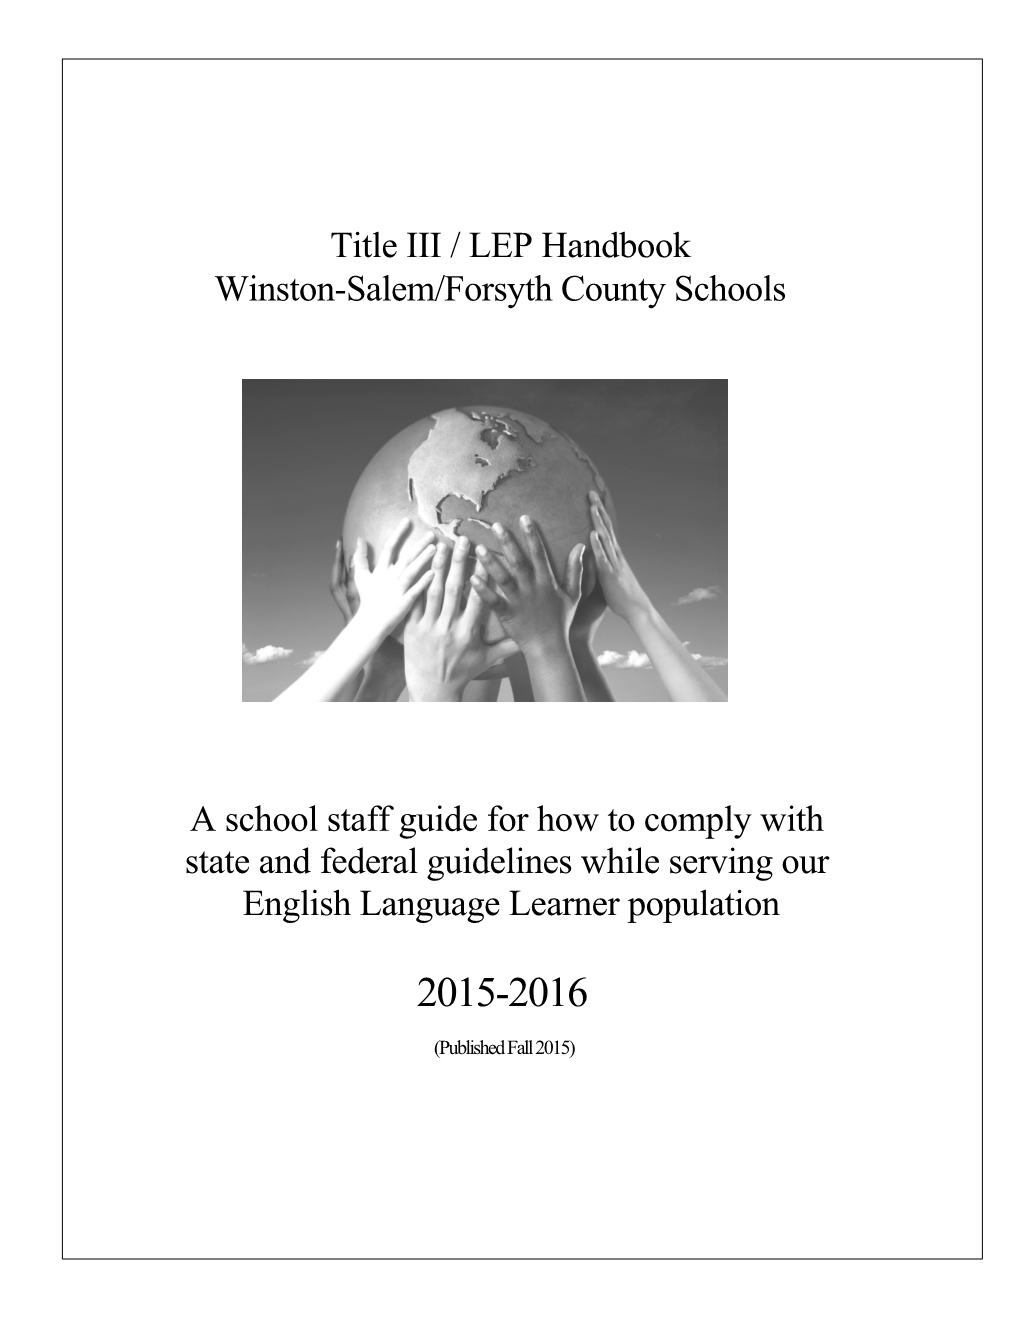 A Guide to Understanding LEP, ESL and Title III Issues